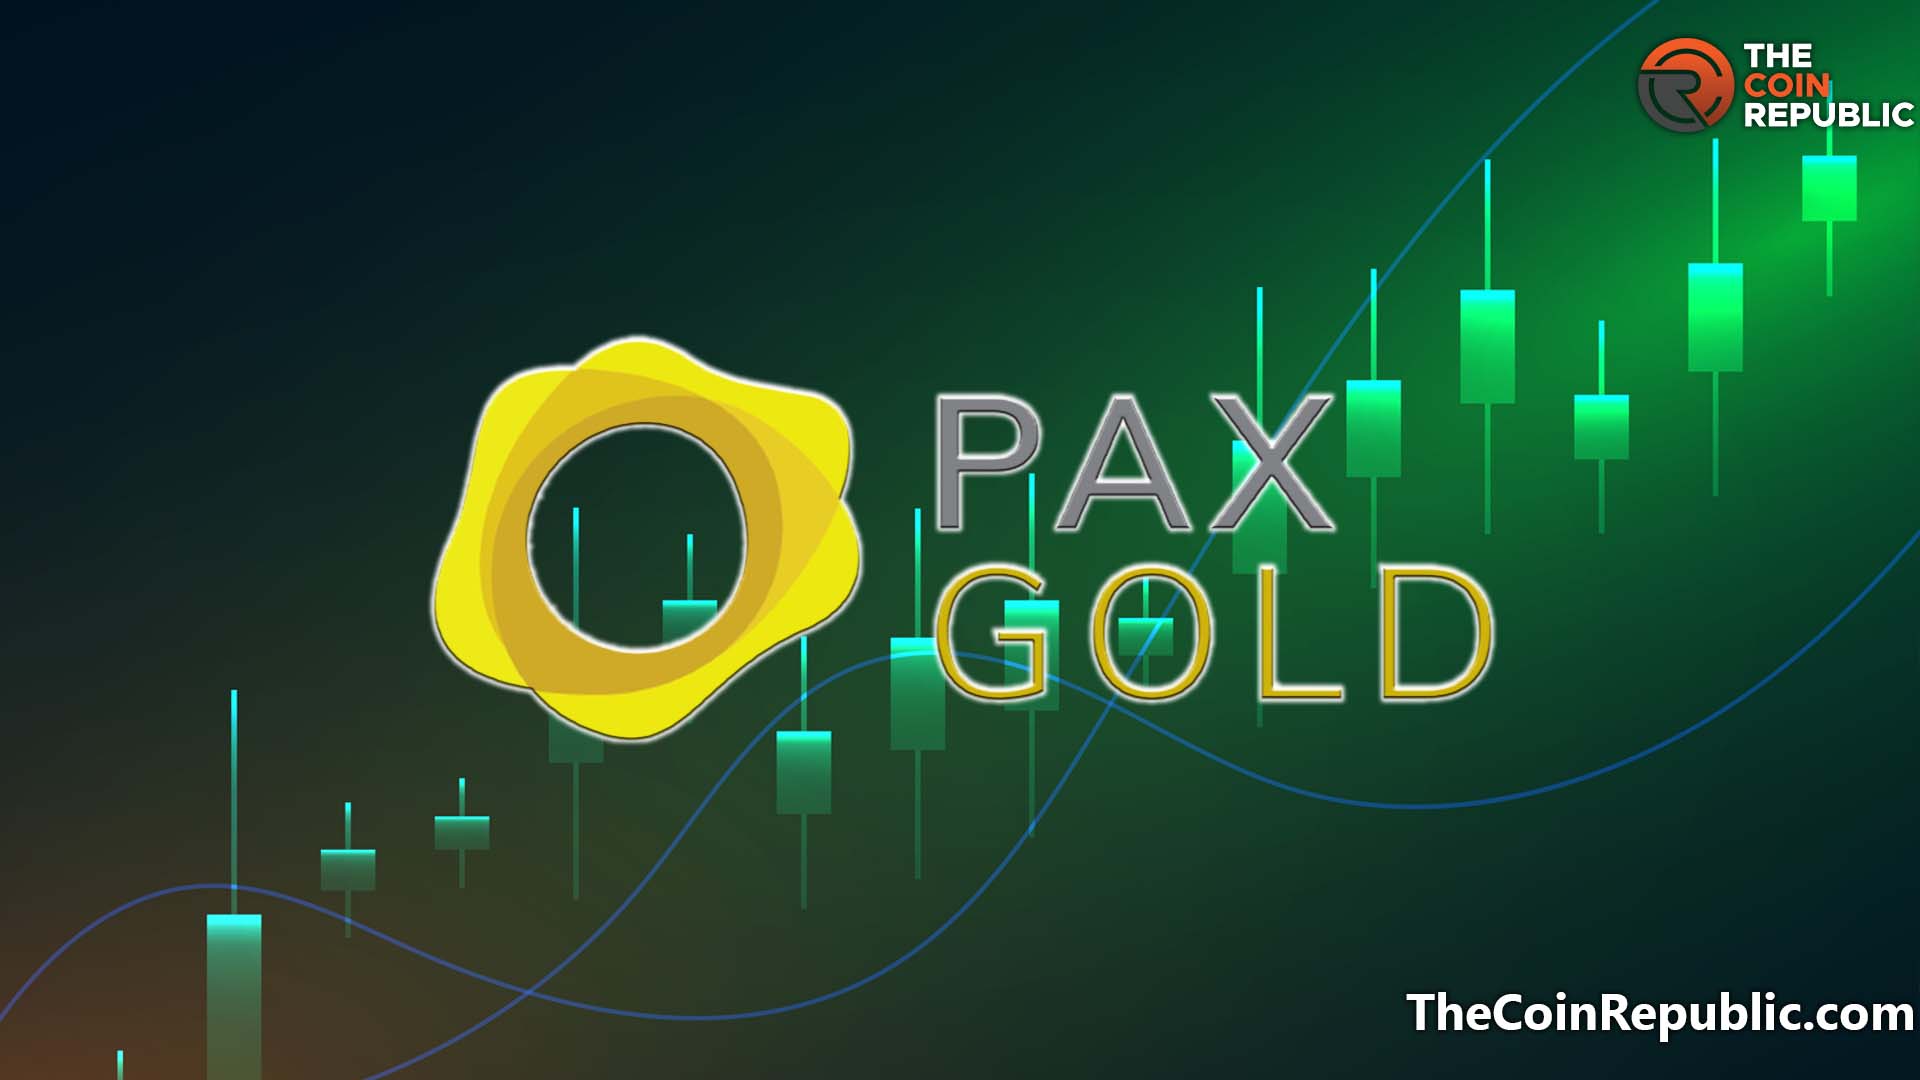 PAX Gold is leading weekly gains, becomes highest gainer of the week